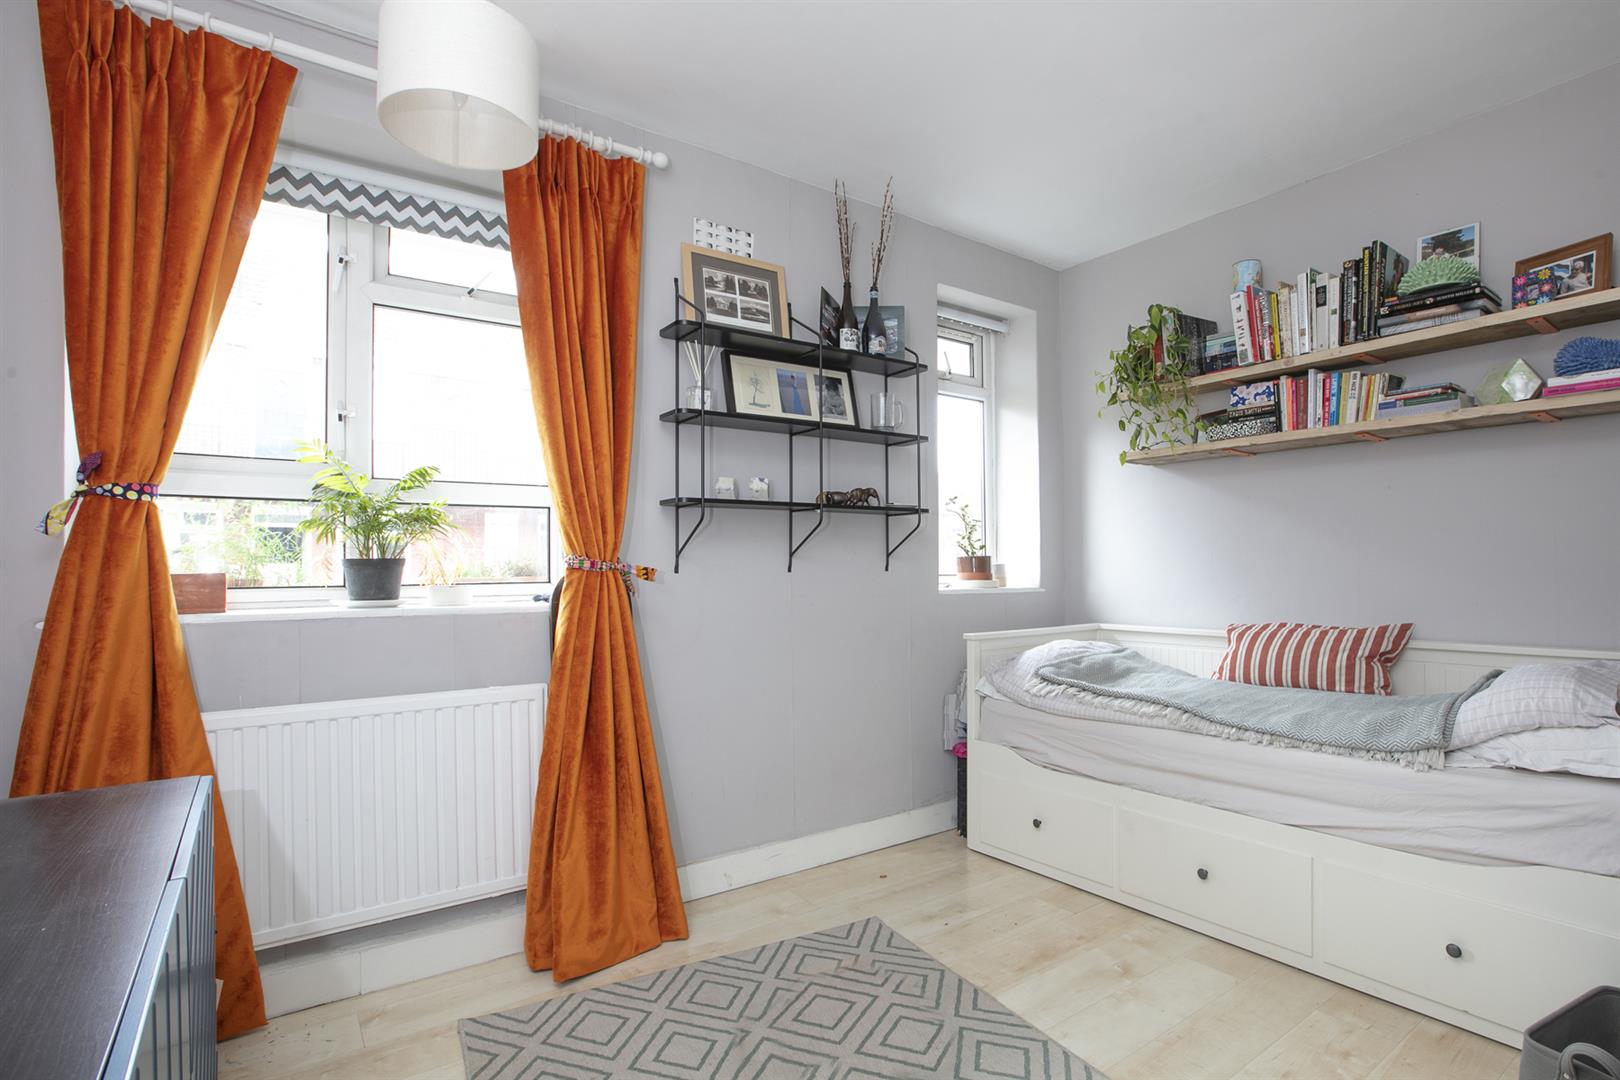 Flat - Purpose Built For Sale in Bonsor Street, Camberwell, SE5 870 view9